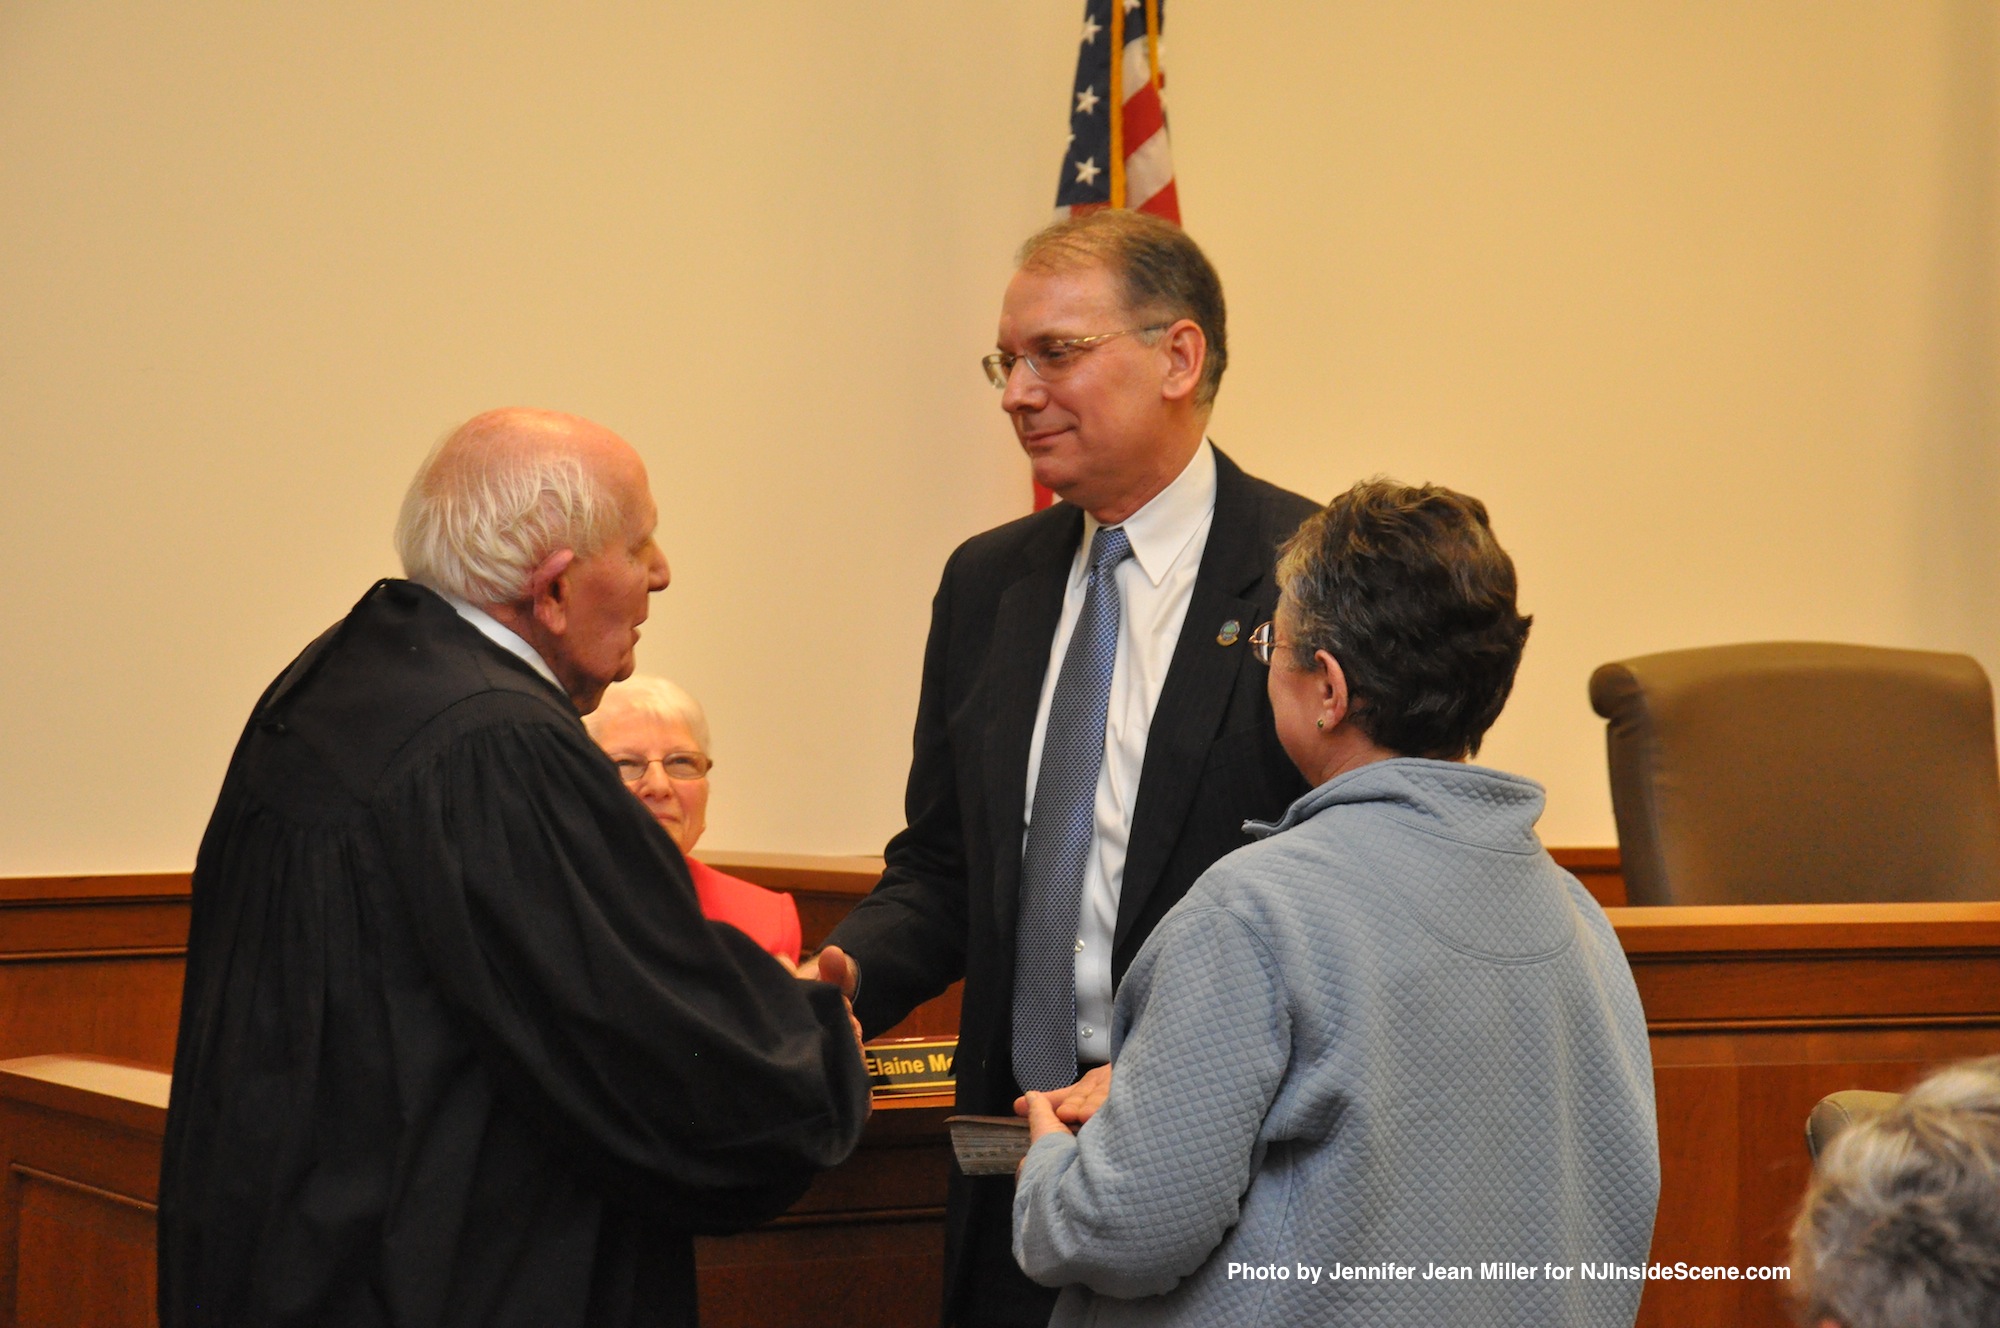 Dennis Mudrick, as he is sworn in as Deputy Director of the Sussex County Board of Chosen Freeholders, with his mother, Ann, and Judge Frederic Weber.